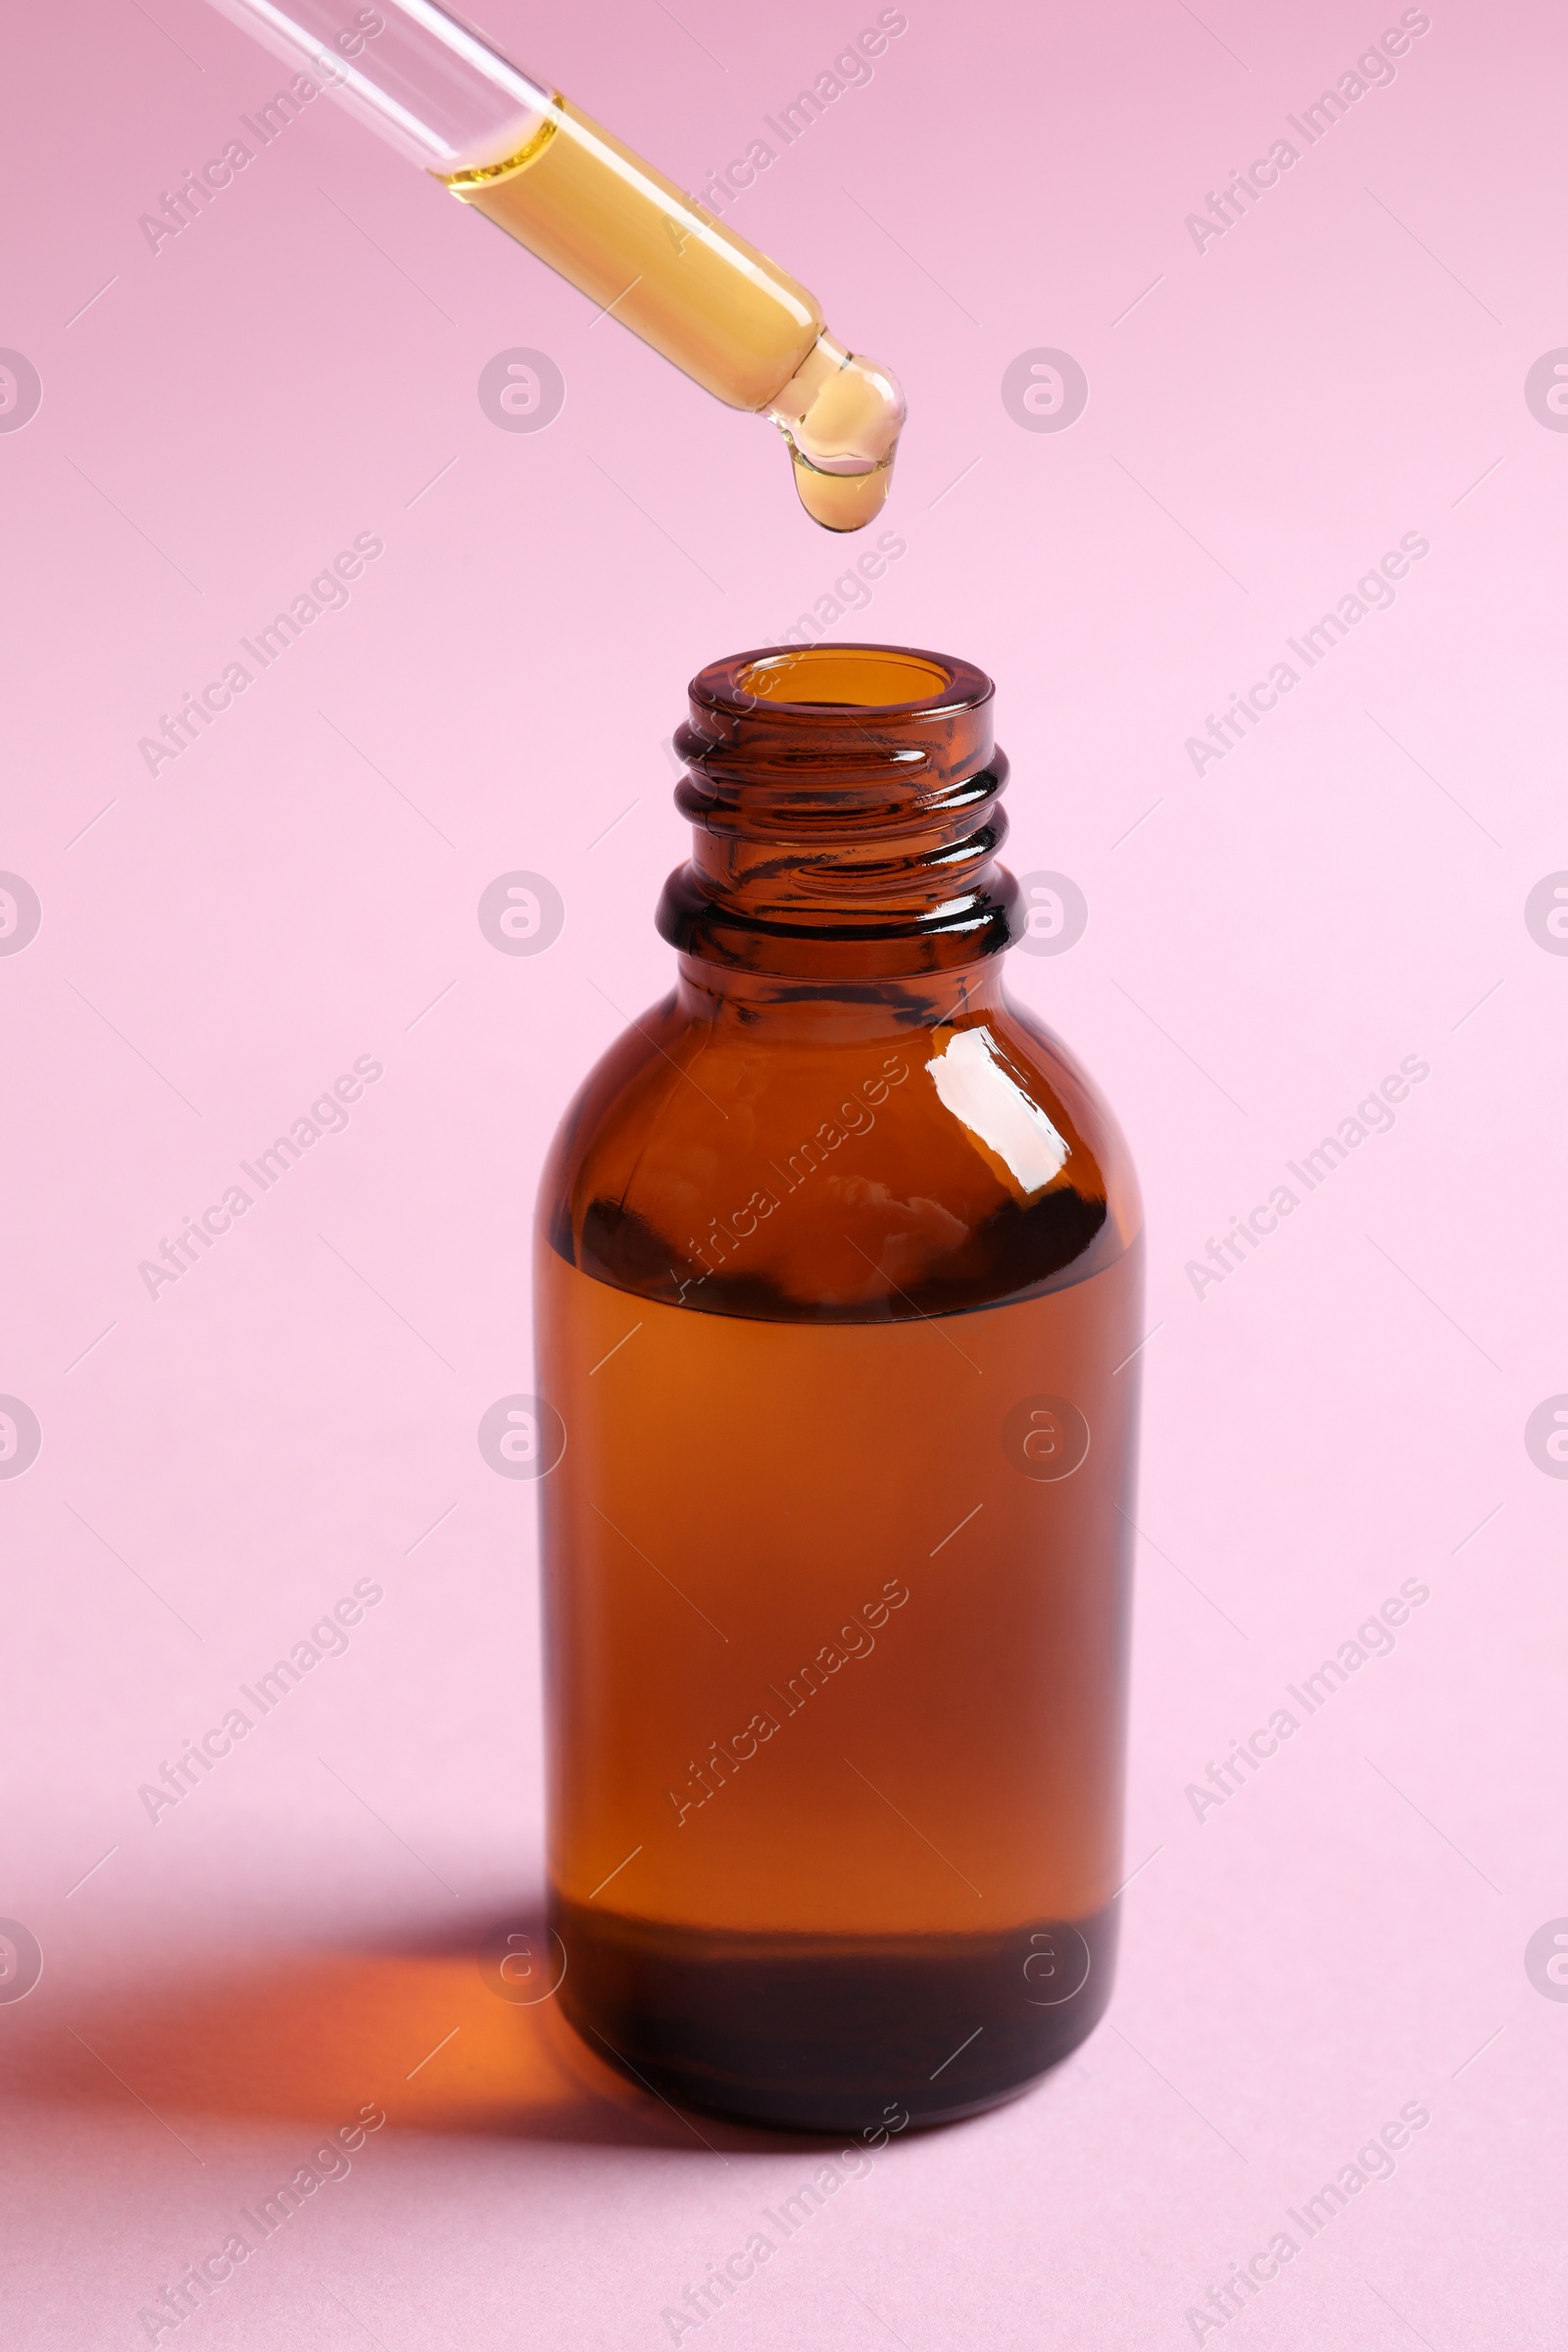 Photo of Dripping cosmetic oil from pipette into bottle on pink background